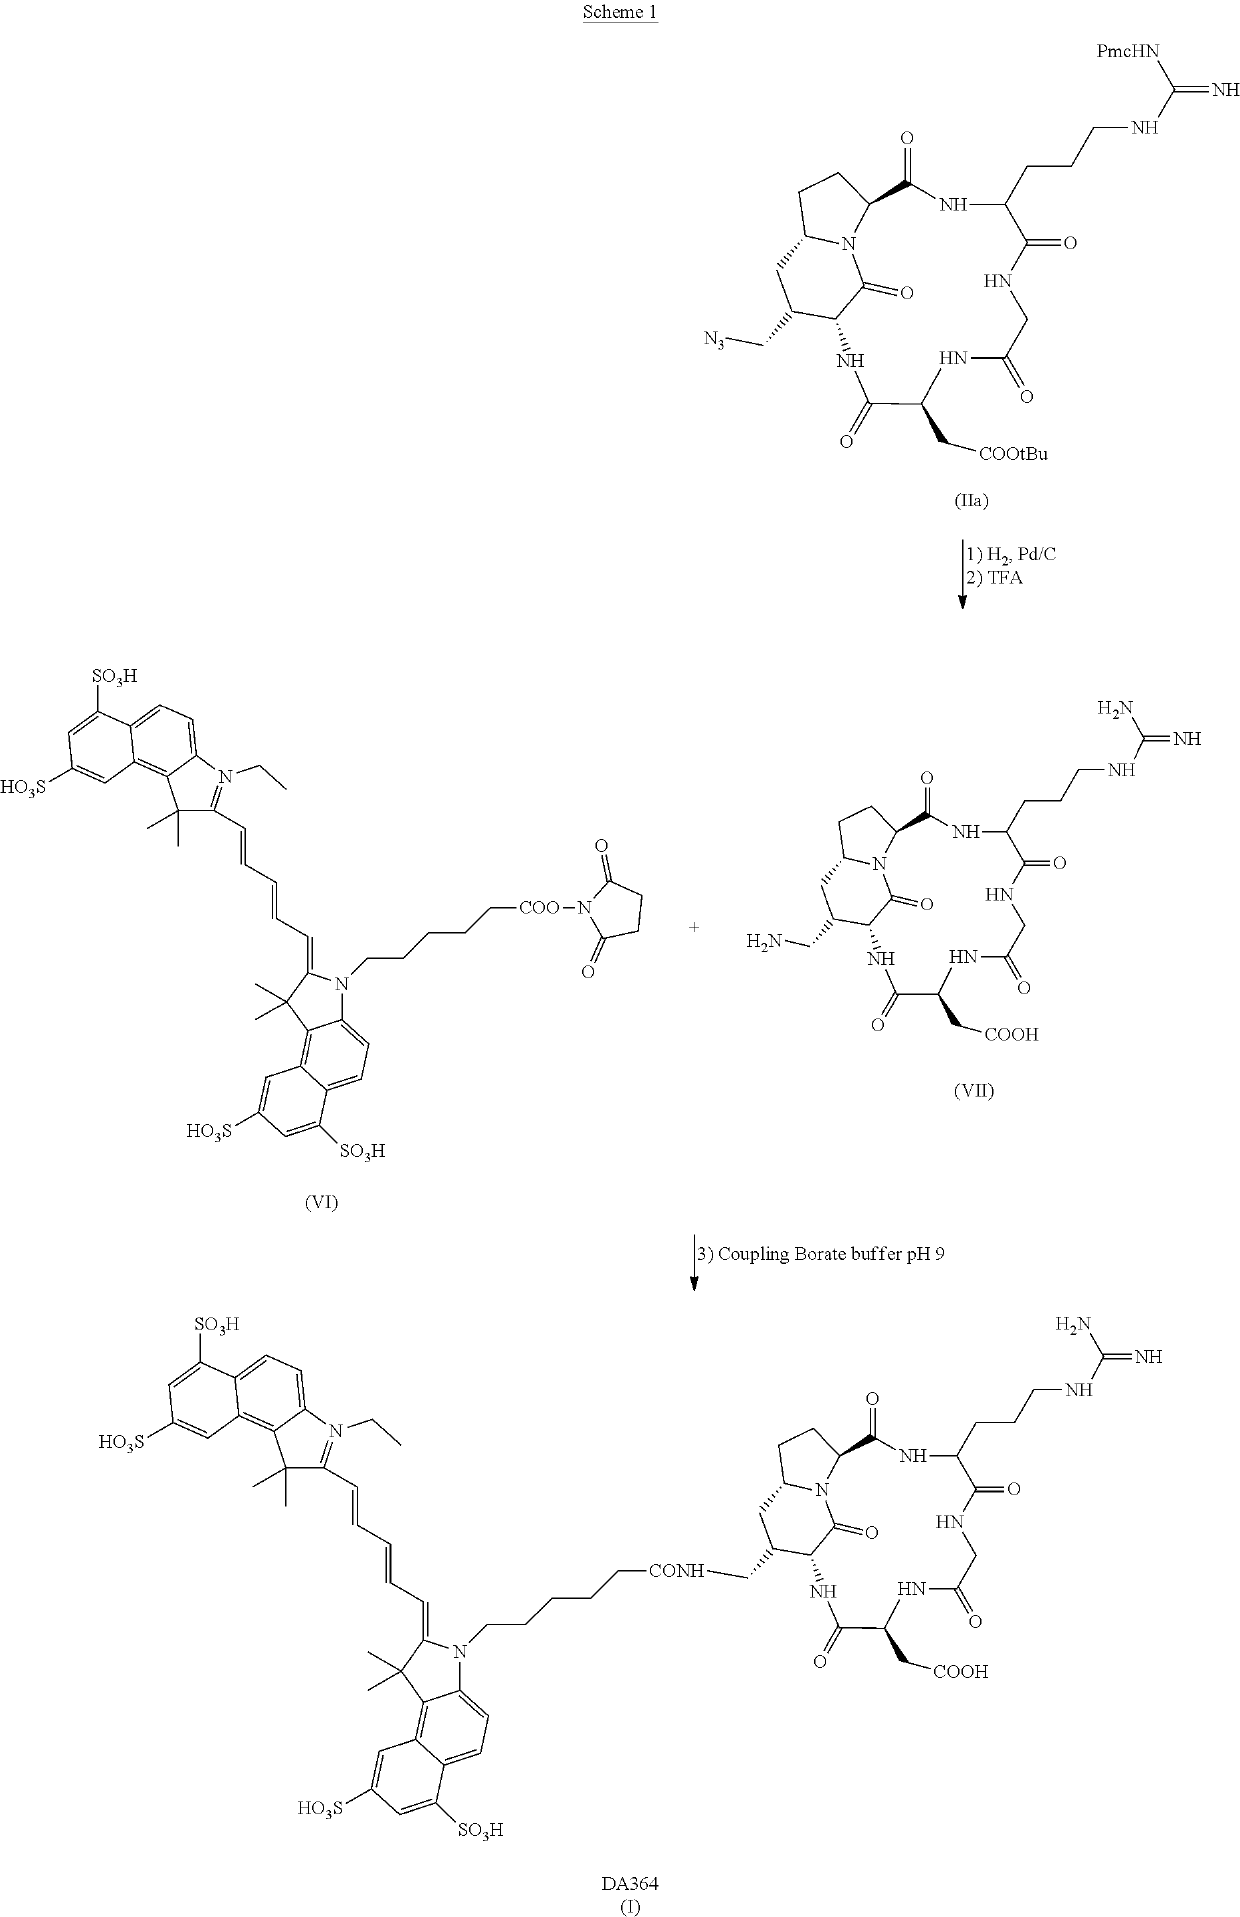 Synthesis of NIR fluorescent probe